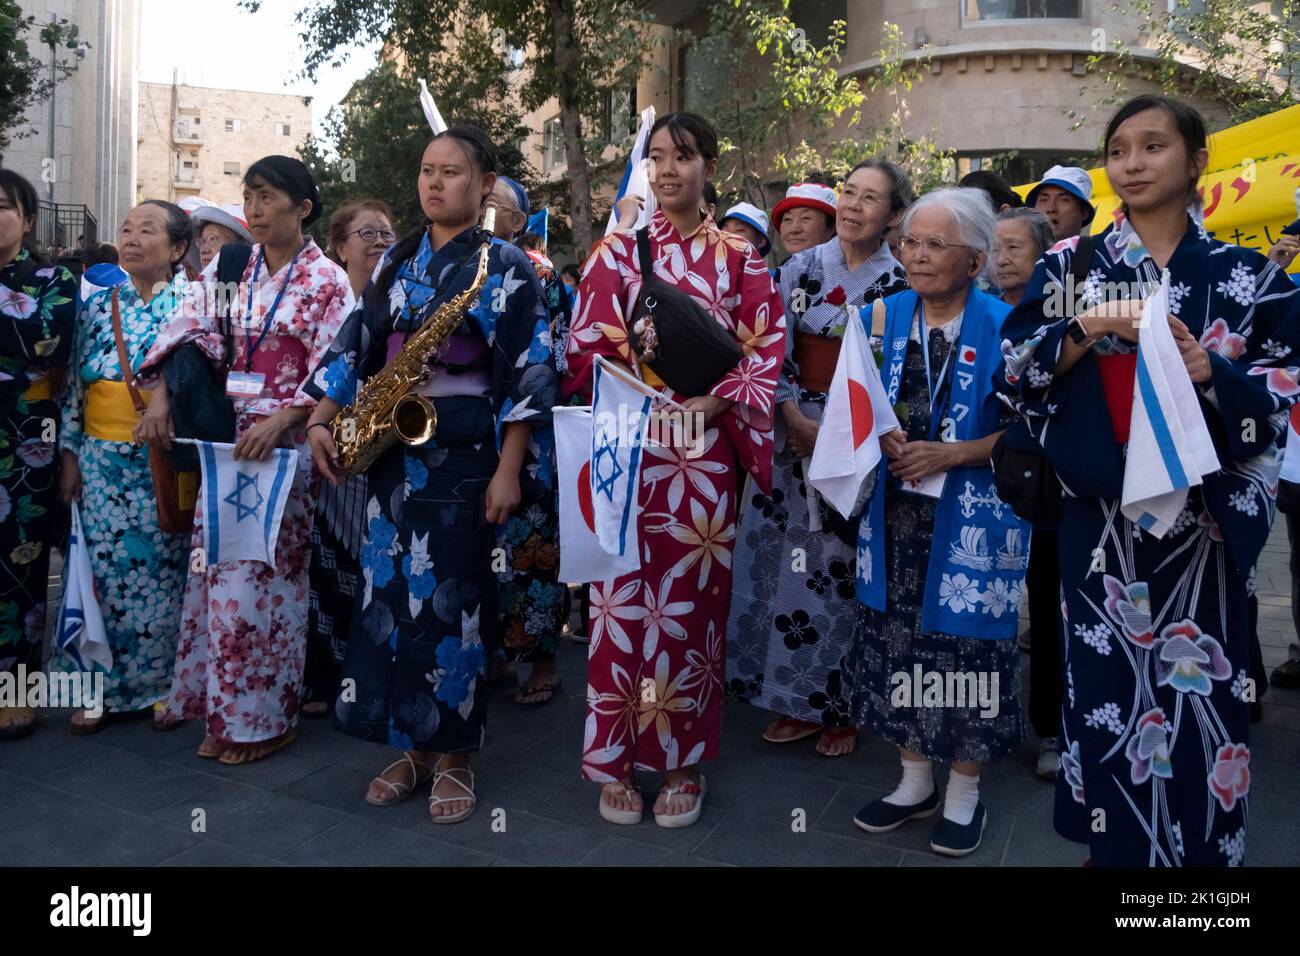 Members of the Japanese Makuya movement hold the national flags of Israel and Japan as they gather in Zion Square on September 18, 2022 in downtown Jerusalem, Israel. The Makuya movement is a religious movement which was founded in 1948 in Japan, Its members are passionate supporters of Israel and consider the establishment of the Jewish state and the unification of Jerusalem 19 years later to be the fulfillment of biblical prophecies. Stock Photo